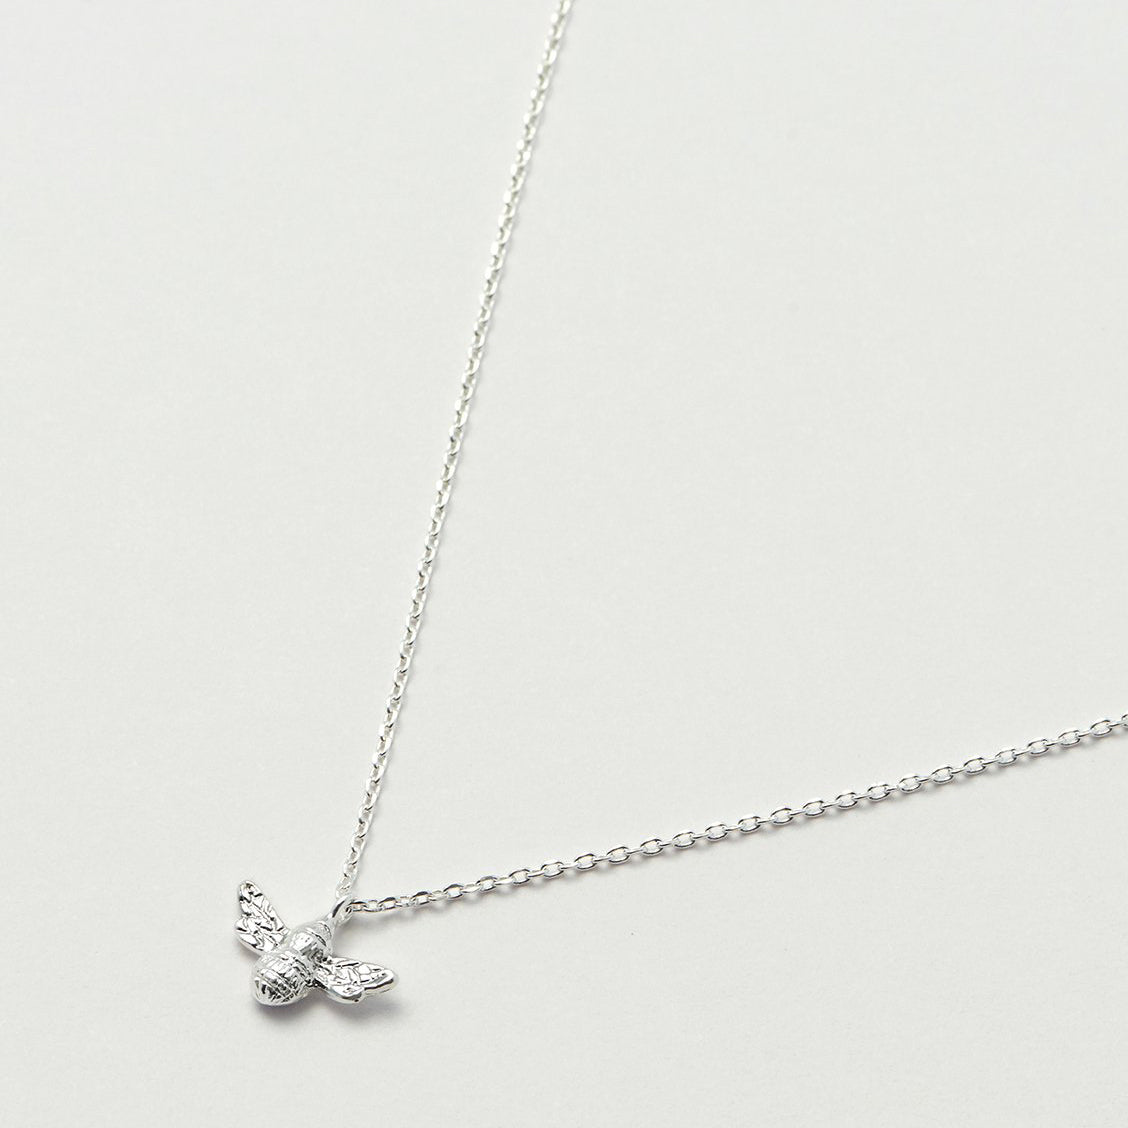 Silver Plated Bee Necklace by Estella Bartlett